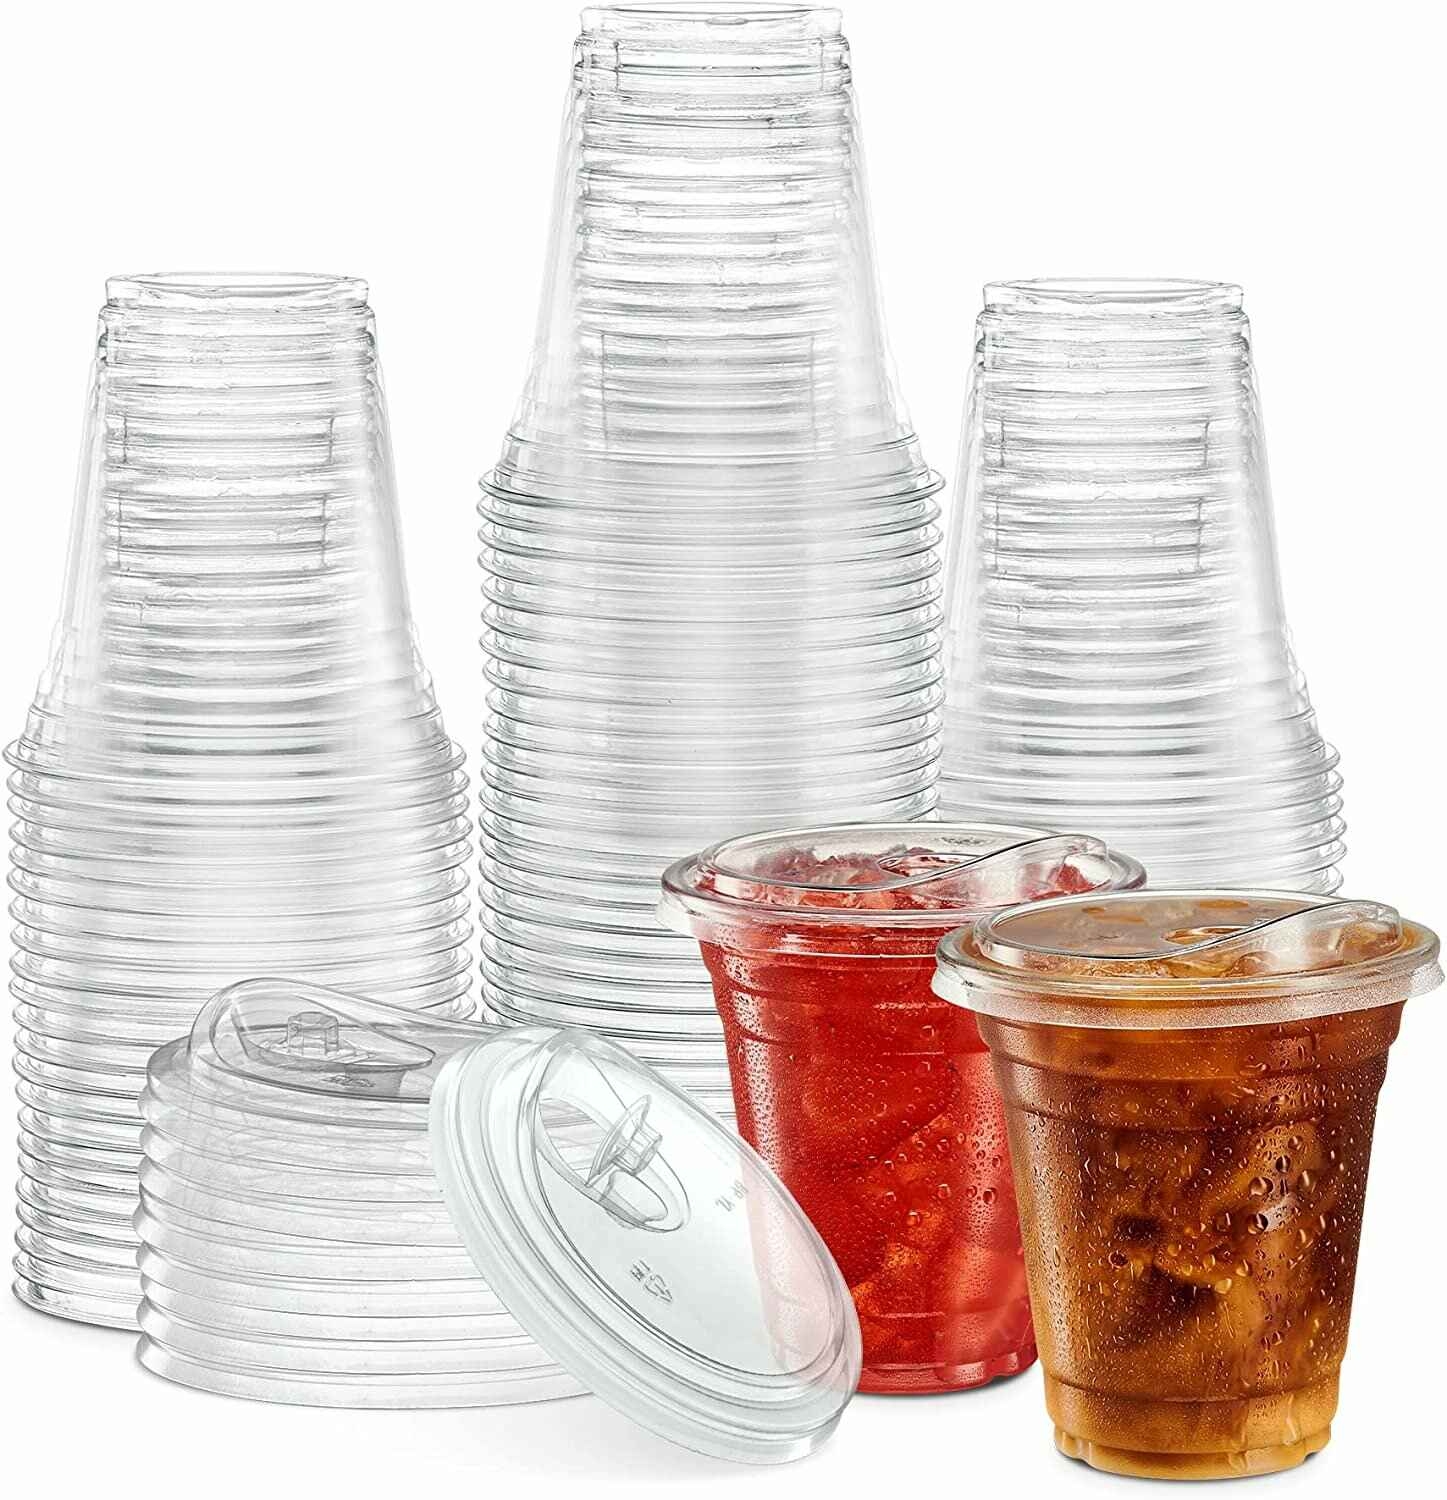 50 Sets] 16 oz. Disposable Coffee Cups with Strawless Sip-Lids